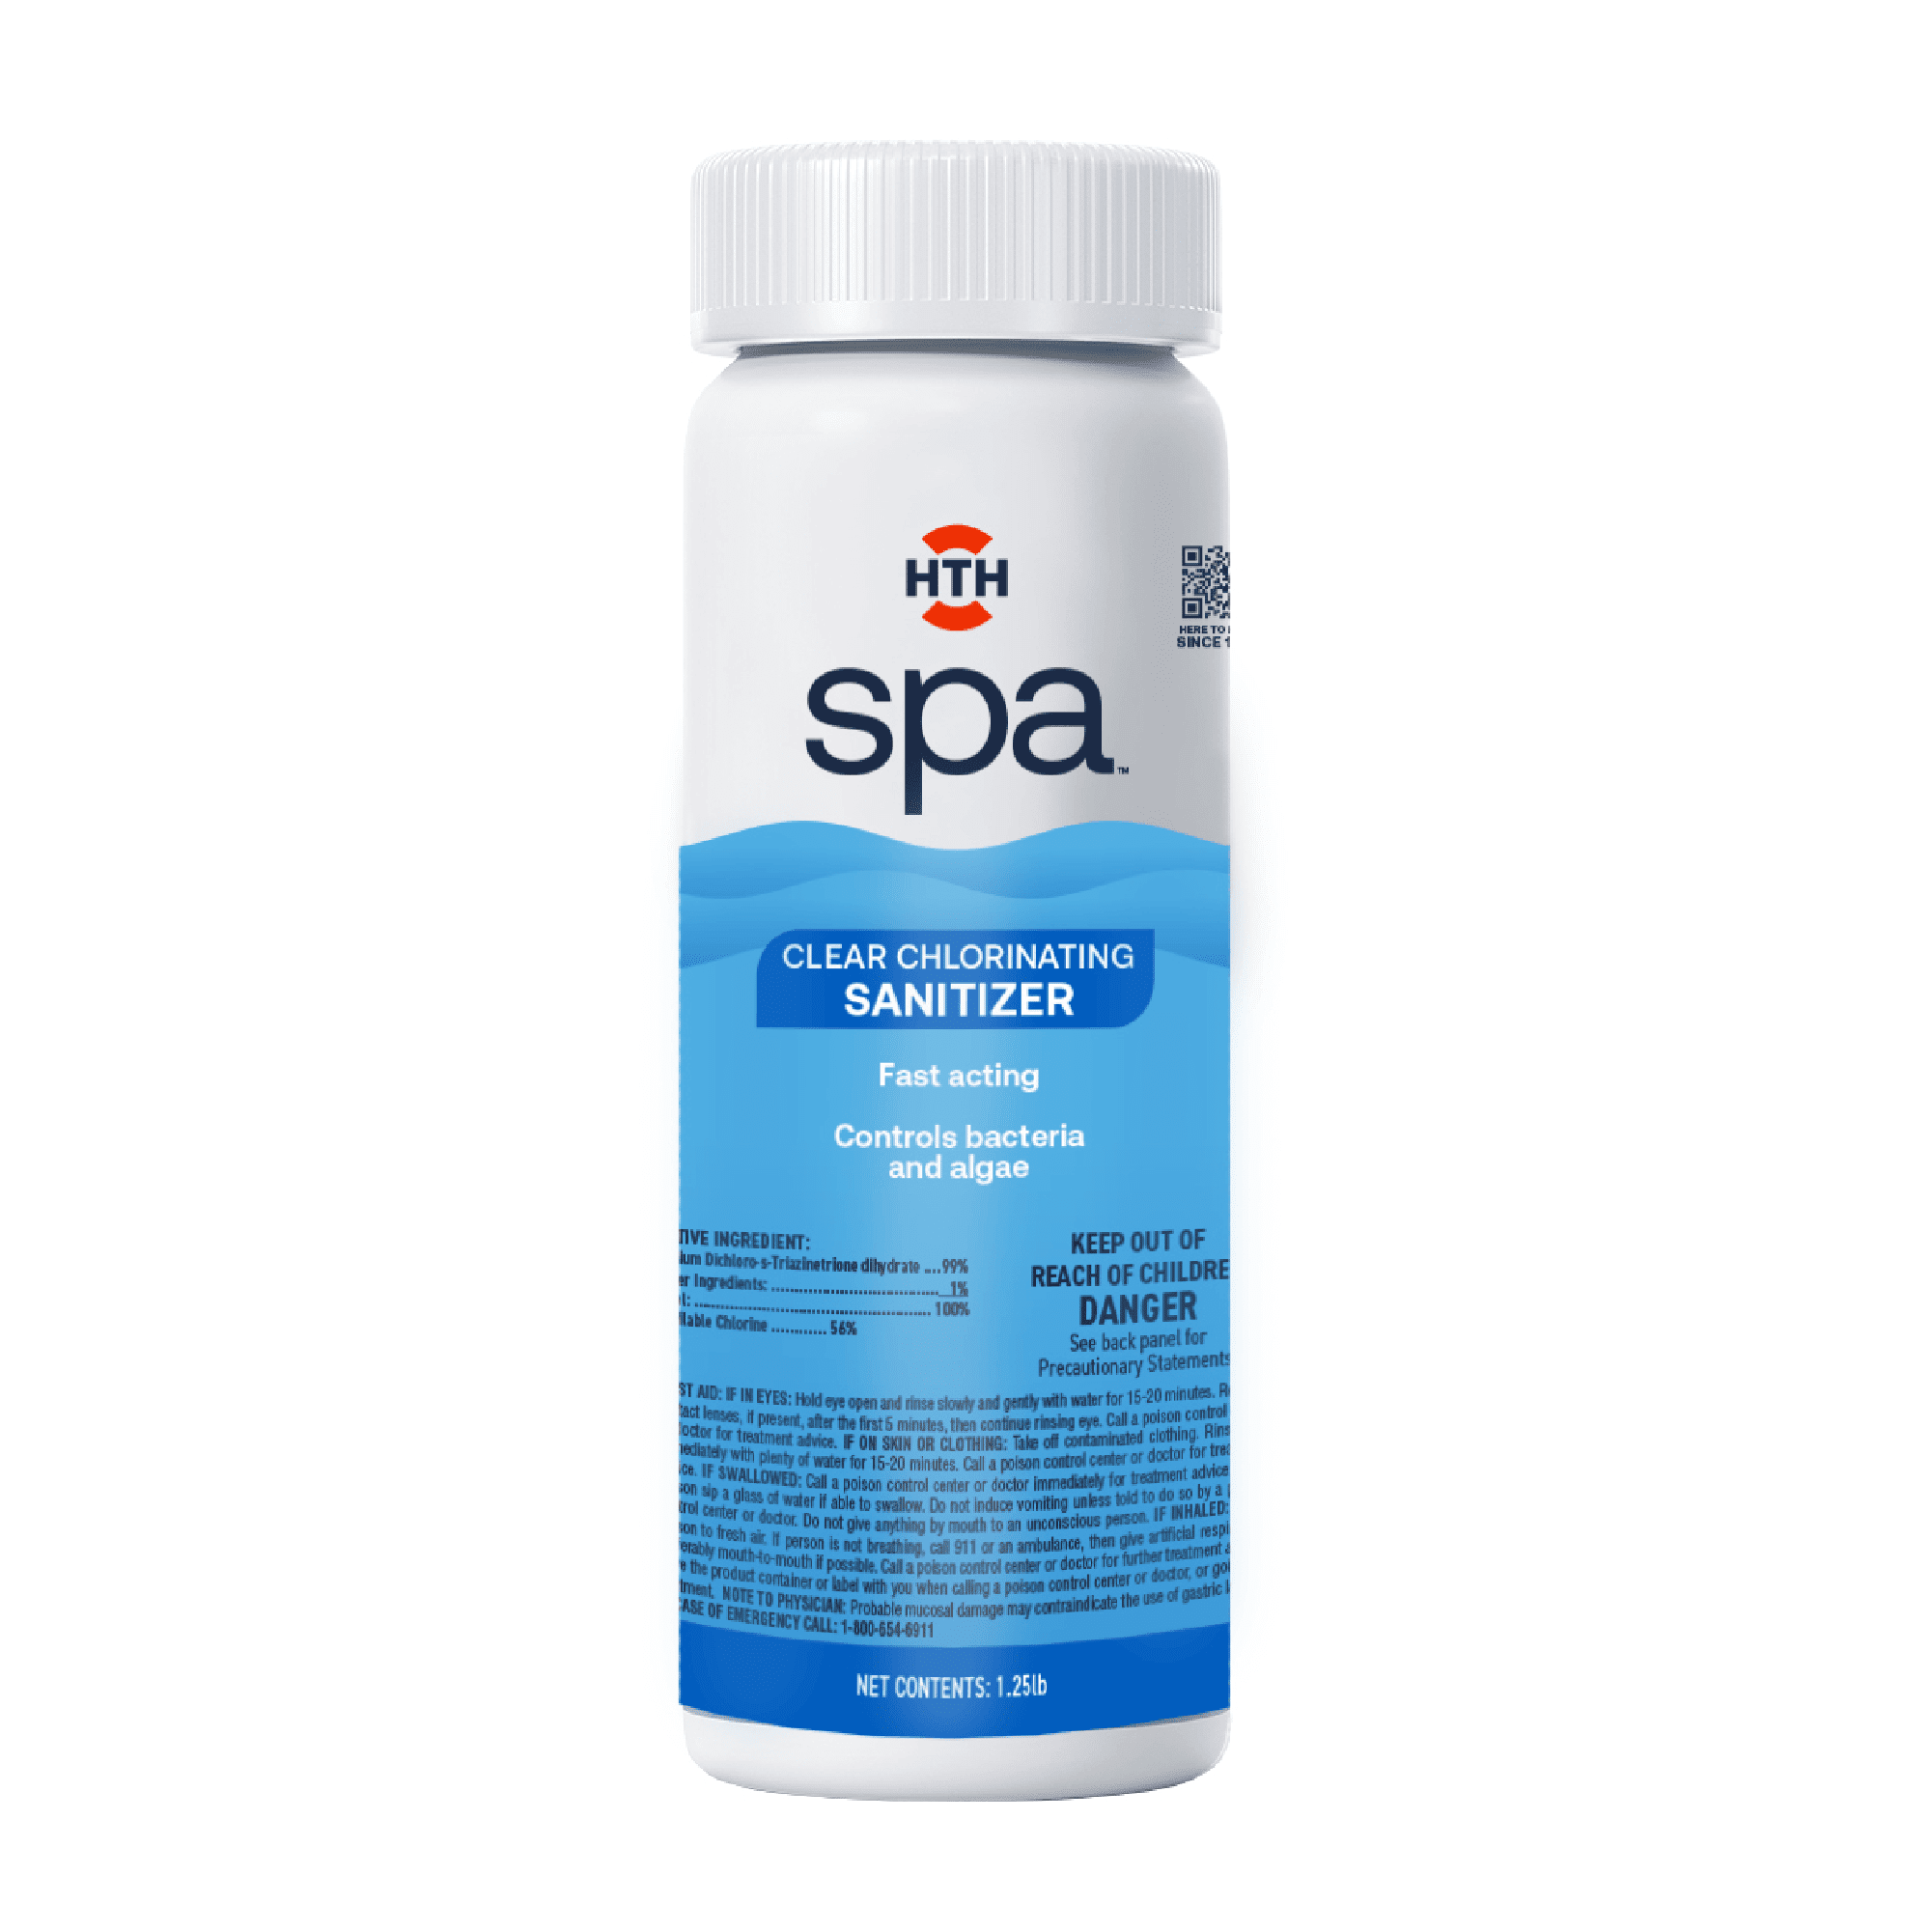 HTH Spa Care Clear Chlorinating Sanitizer for Spa & Hot Tubs, 2.25 lbs. (Pool Chemicals)